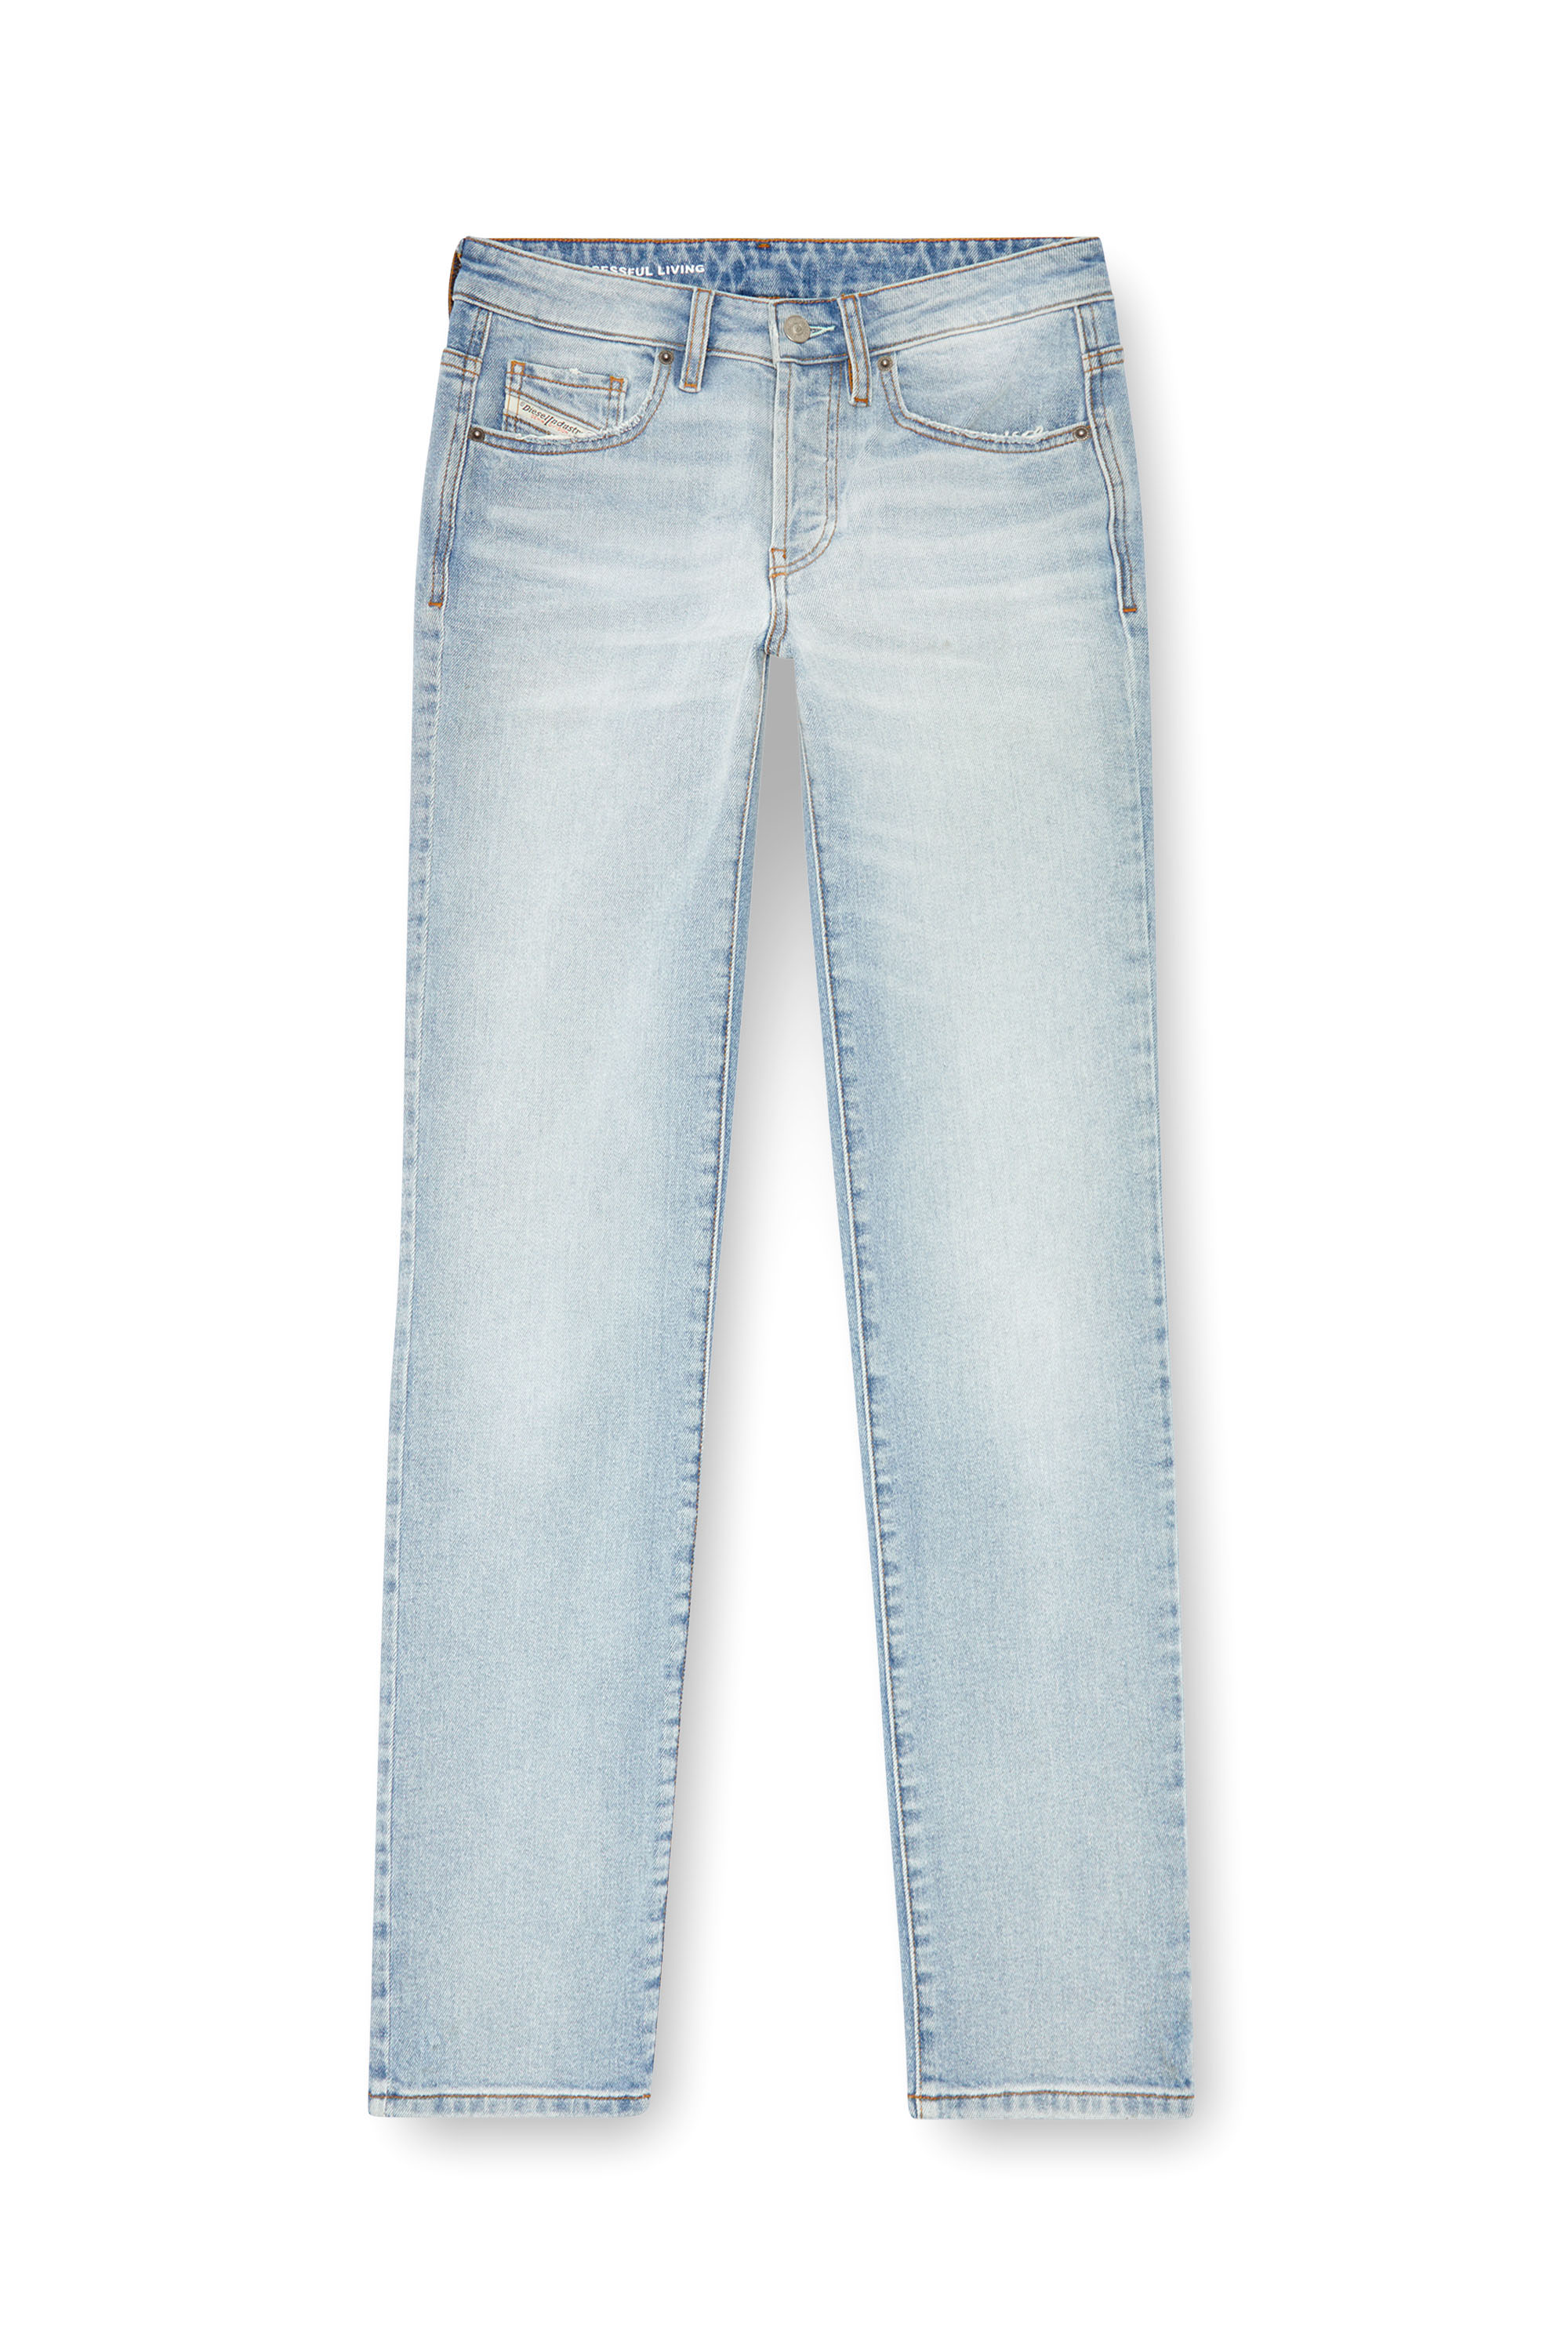 Diesel - Straight Jeans 1989 D-Mine 0GRDM, Mujer Straight Jeans - 1989 D-Mine in Azul marino - Image 3